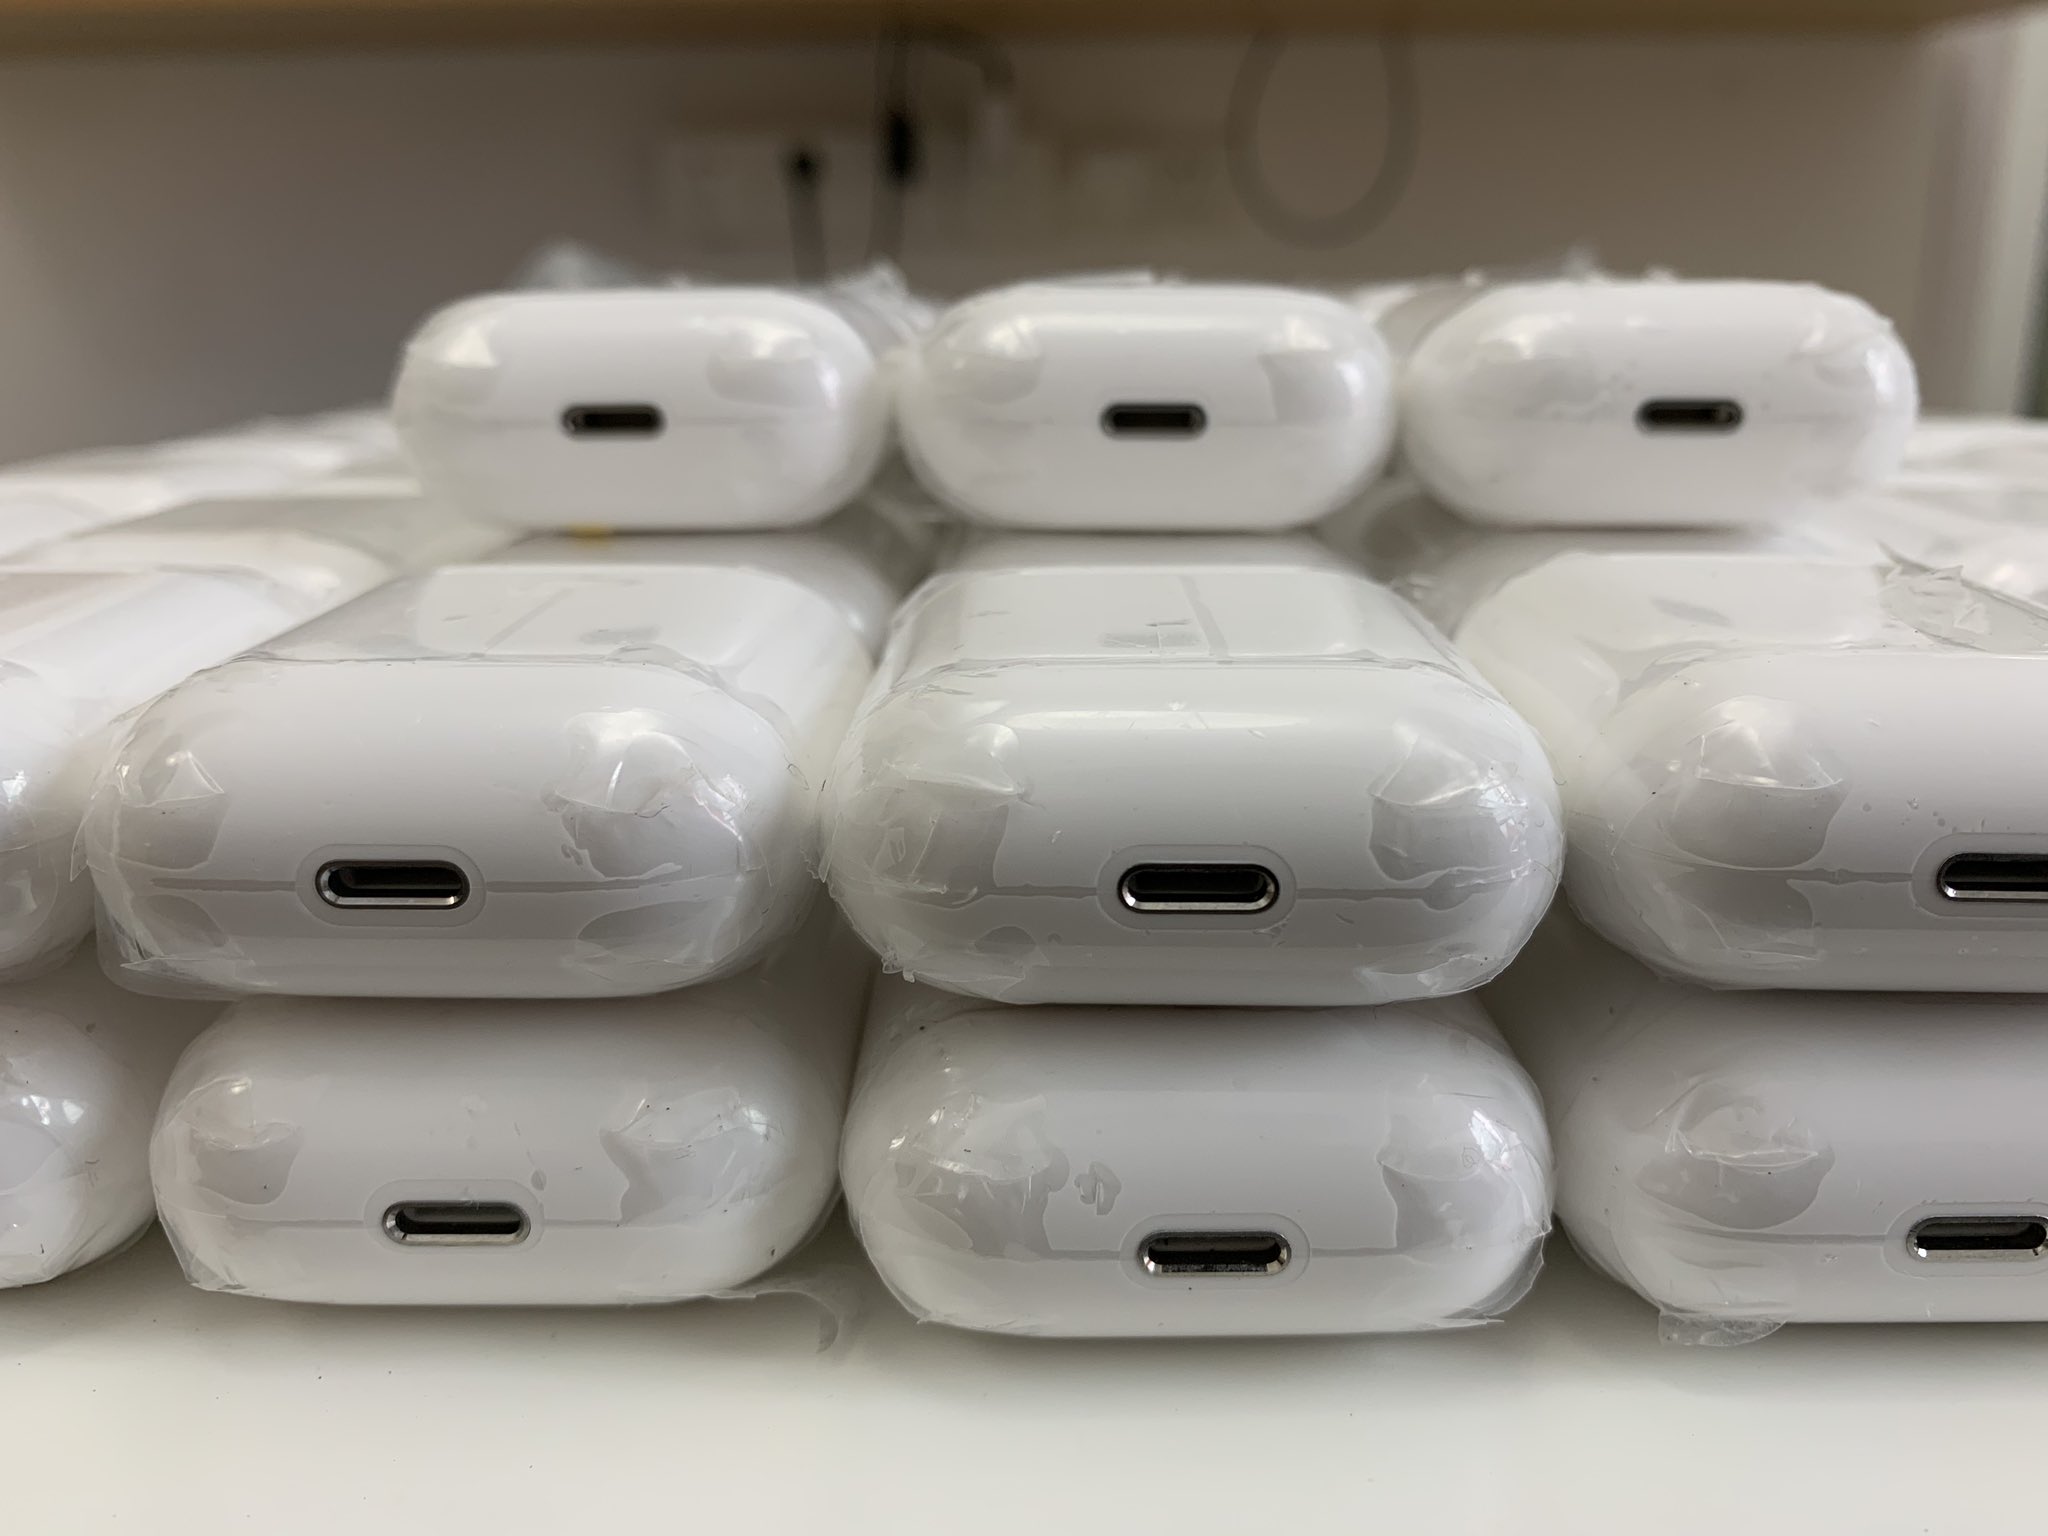 Leaked Photos Show Apple’s Next-gen AirPods for the First Time Ever